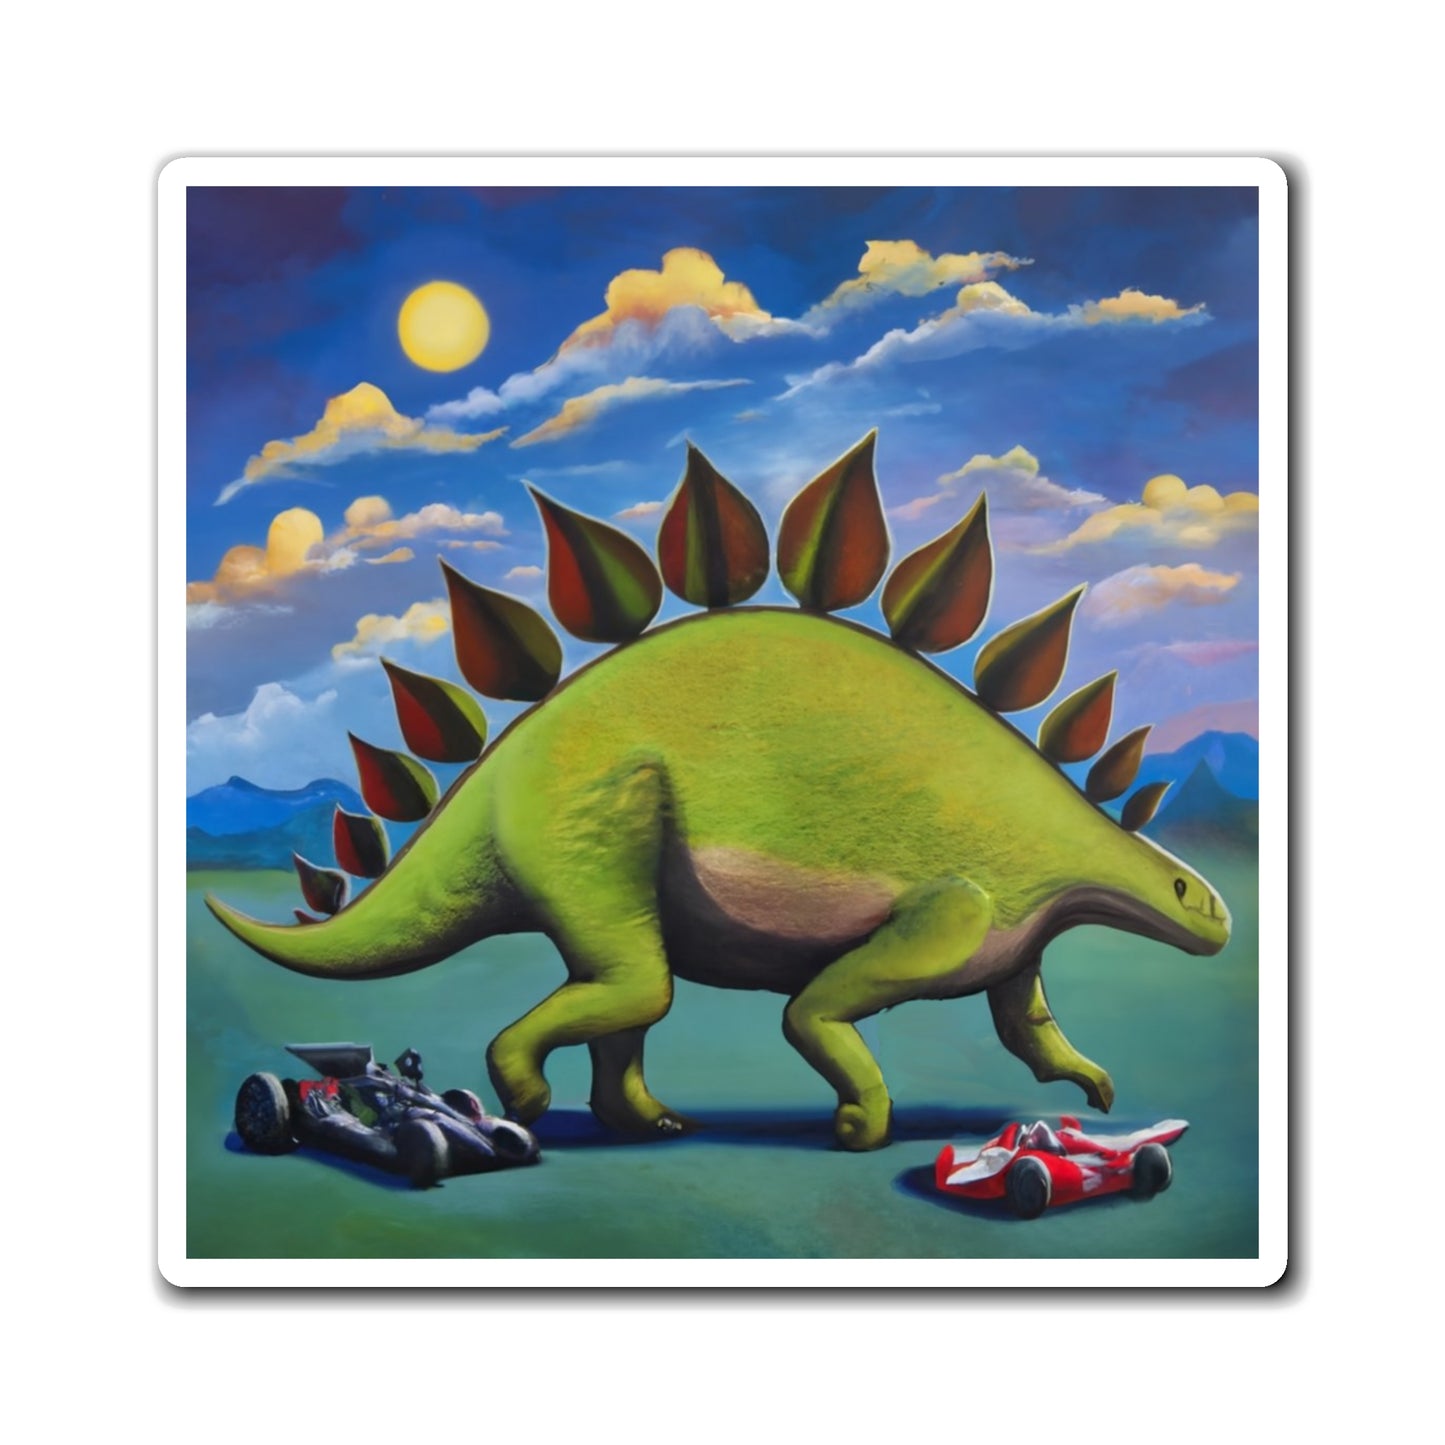 Stegosaurus Meets Indy Cars: Abstract Dino Magnet